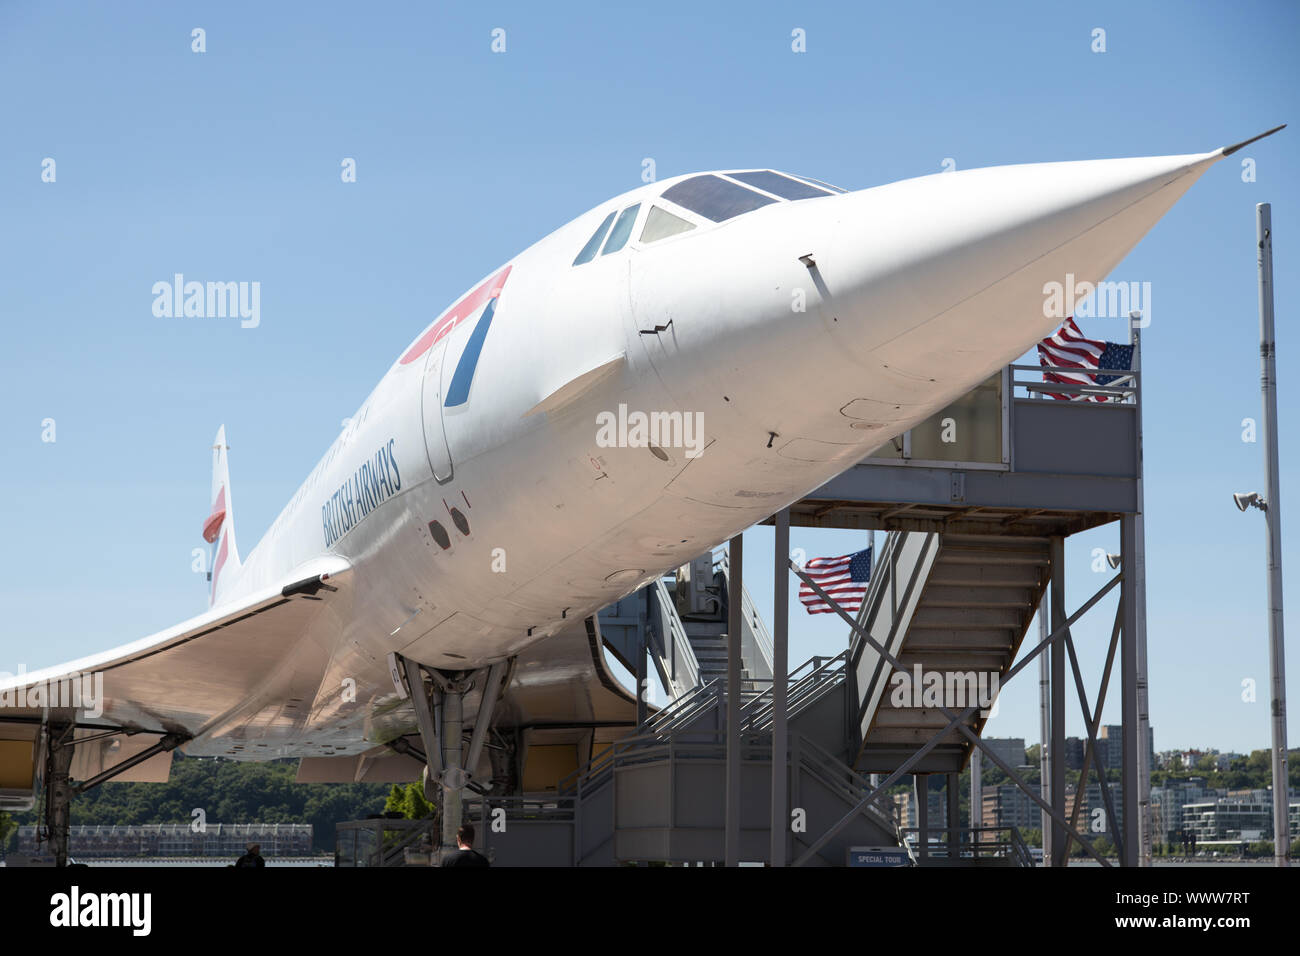 New York, USA - June 11th 2019: British Airways Concorde aircraft nose at Intrepid Sea, Air & Space Museum Stock Photo